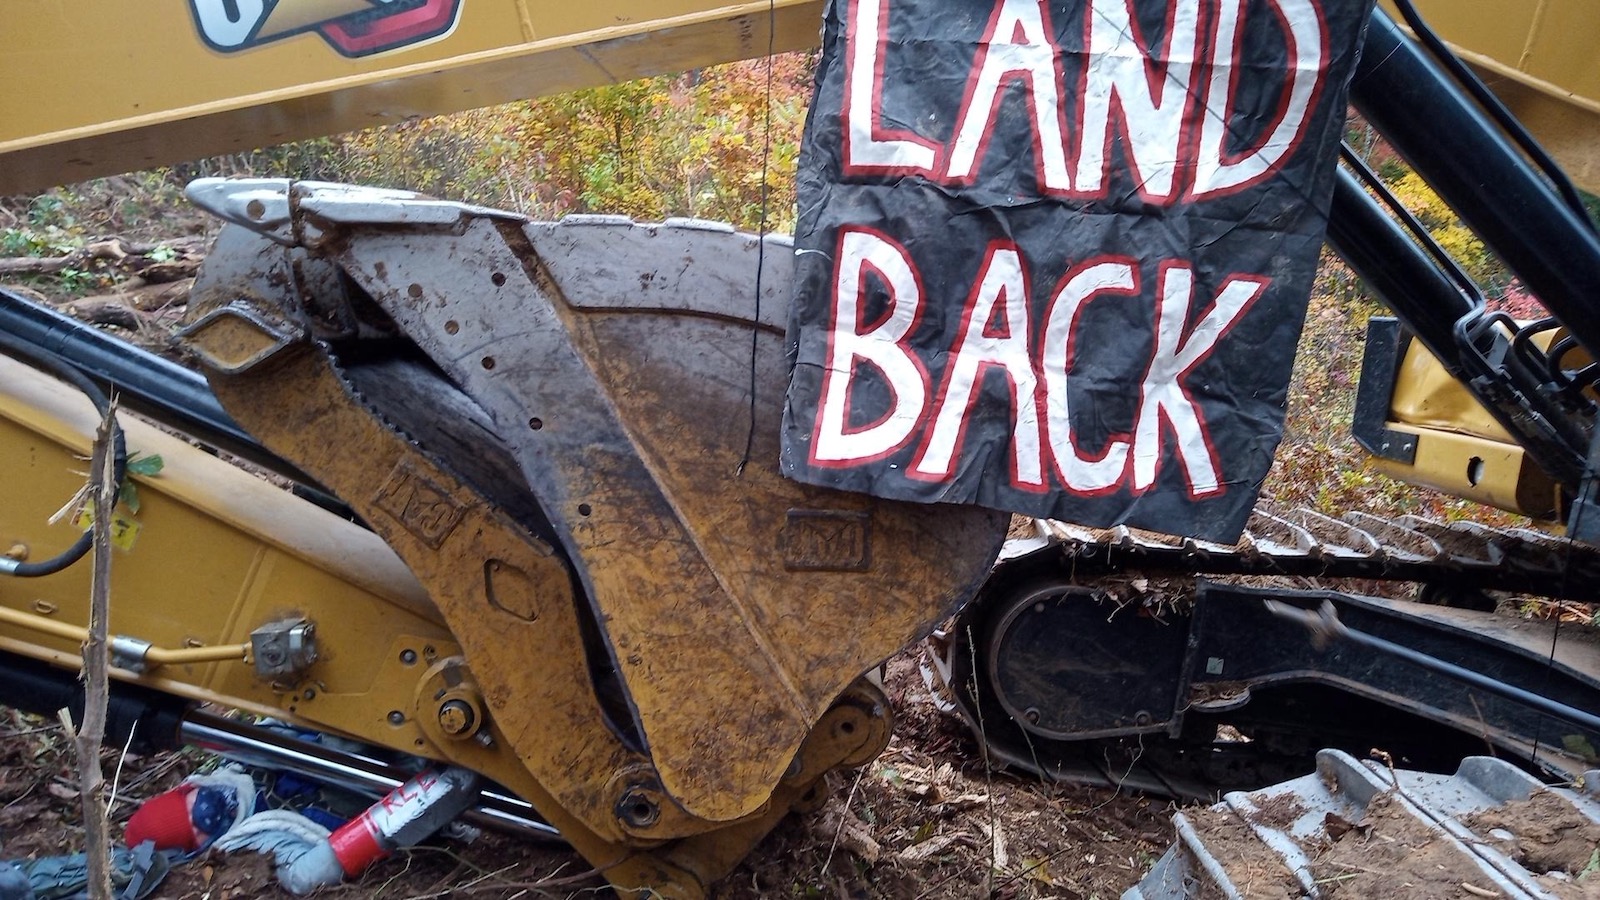 A protestor is chained to a piece of heavy construction equipment beneath a banner reading "Land Back."